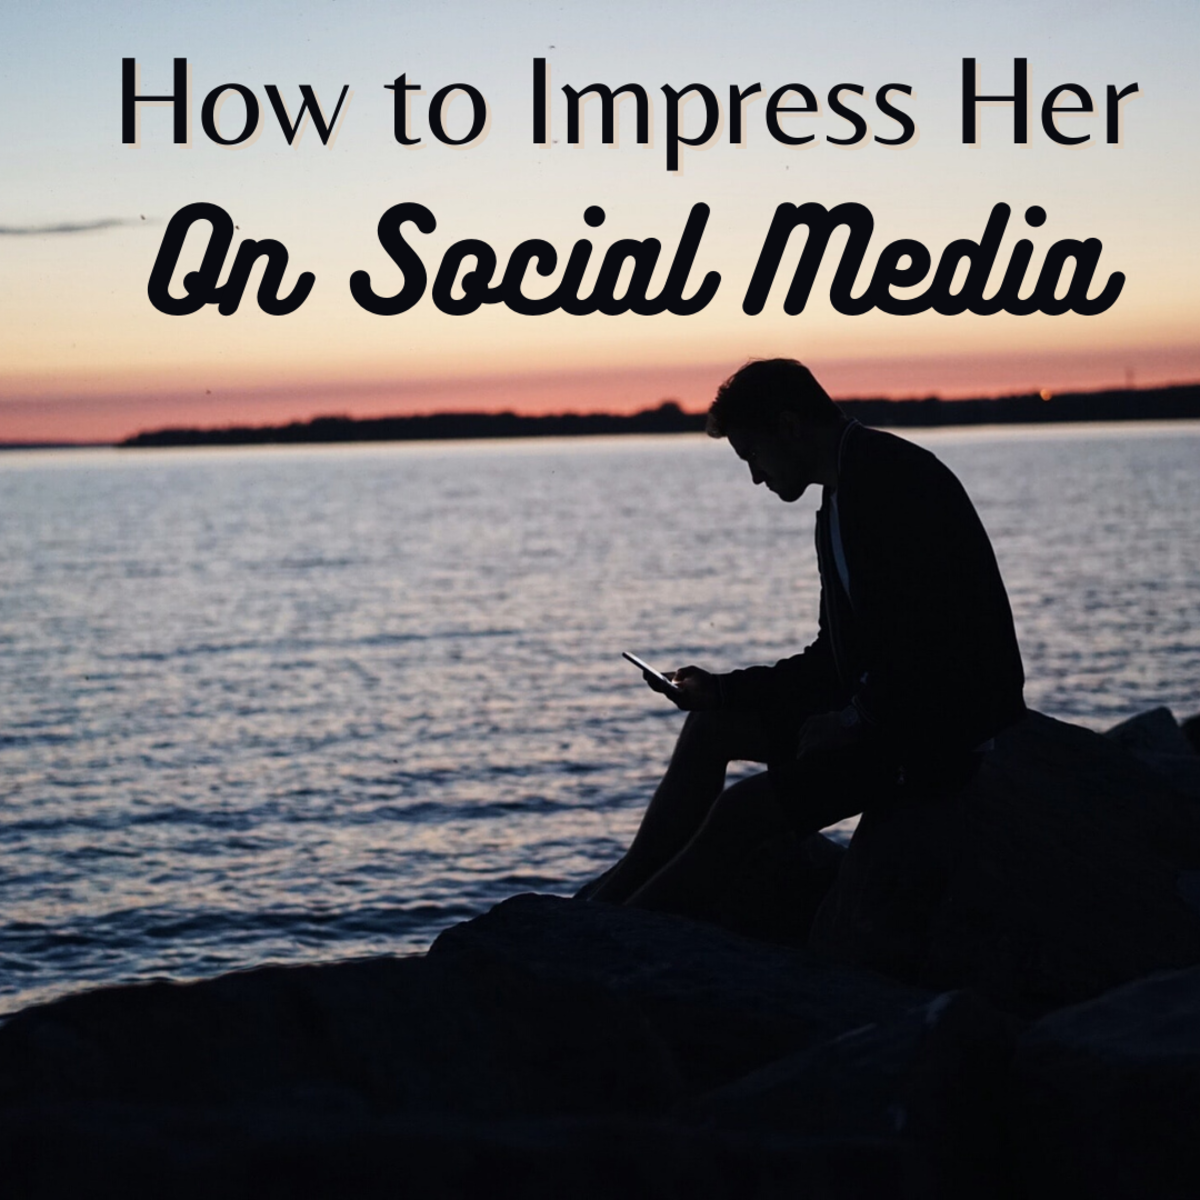 Tips and tricks for impressing her on Facebook, Instagram, and more!